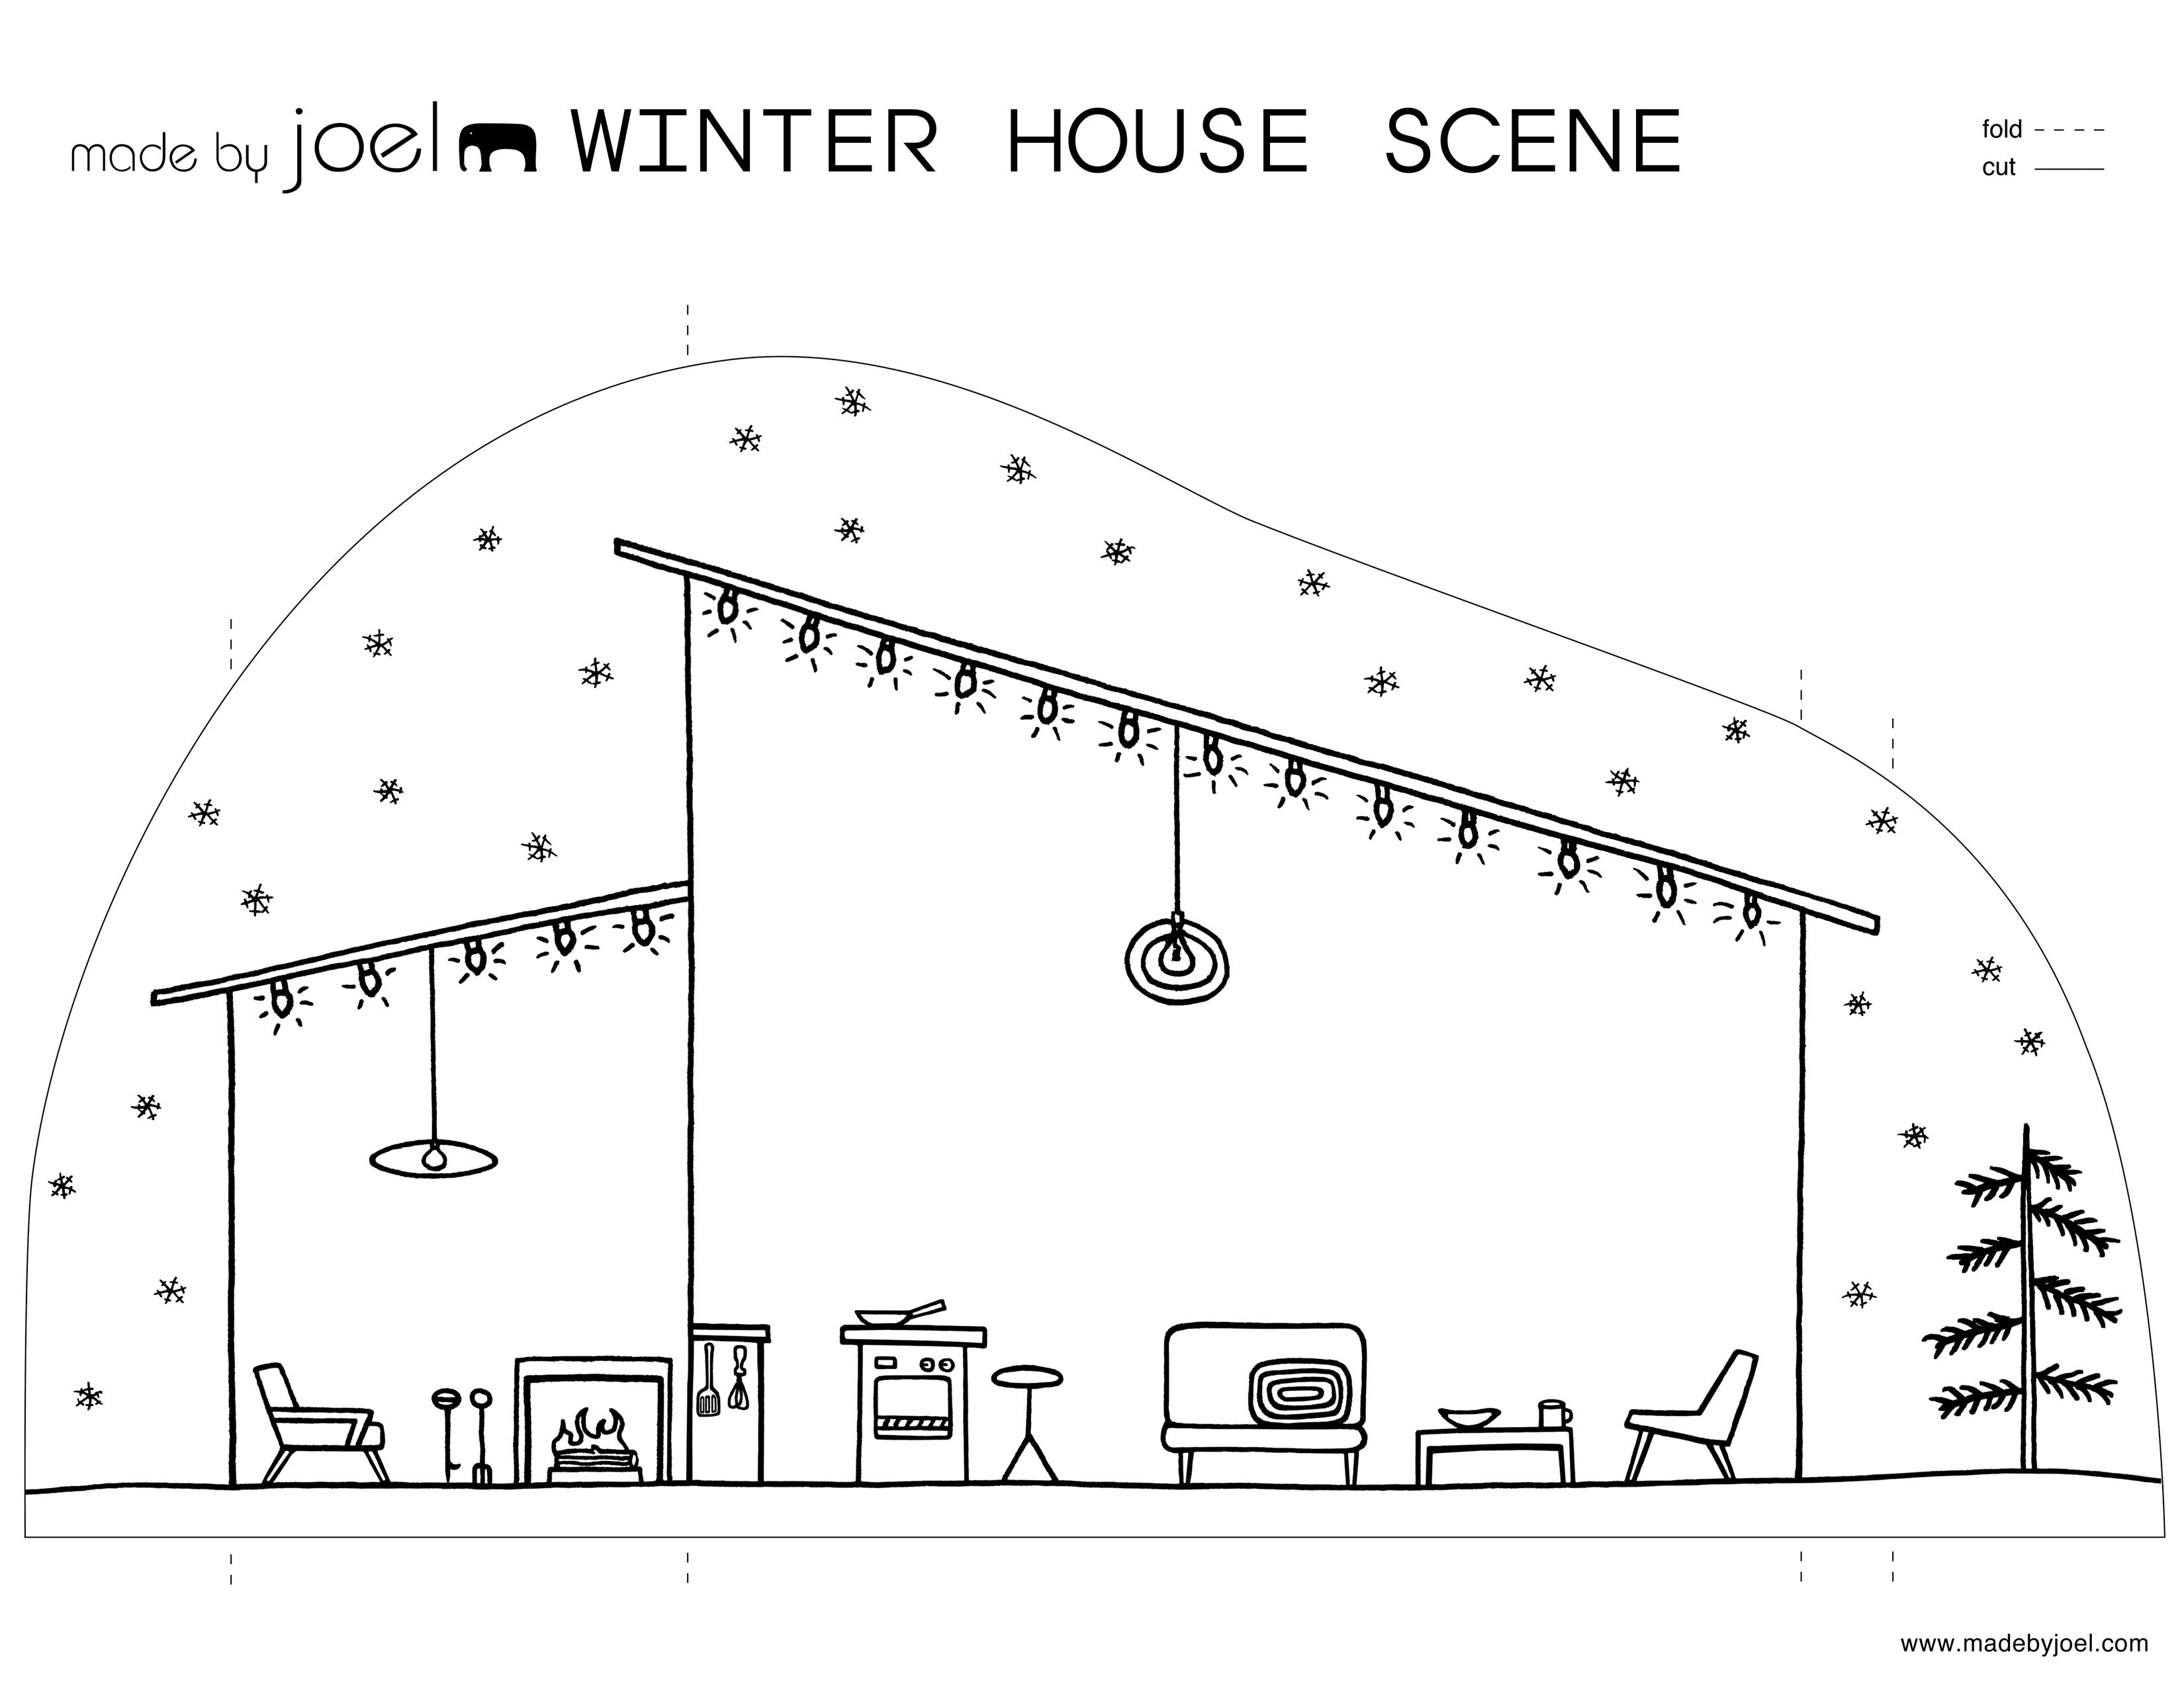 http://madebyjoel.com/wp-content/uploads/2014/12/Made-by-Joel-Winter-House-Paper-City-Scene-Template-1.jpg